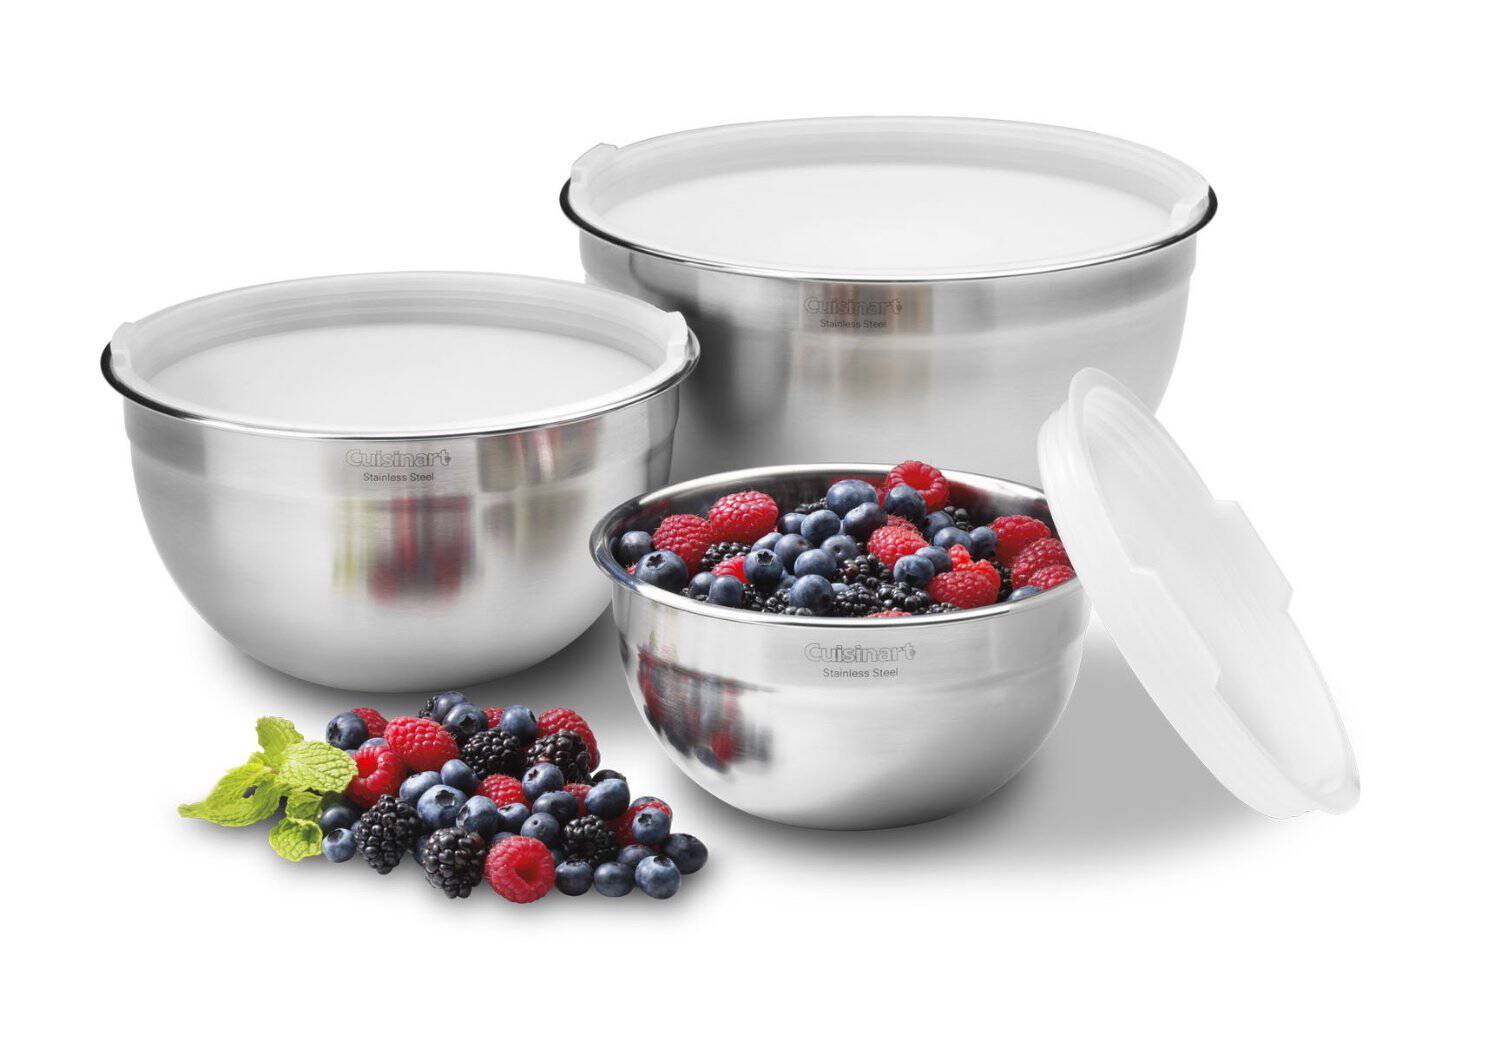 cuisinart stainless steel bowls